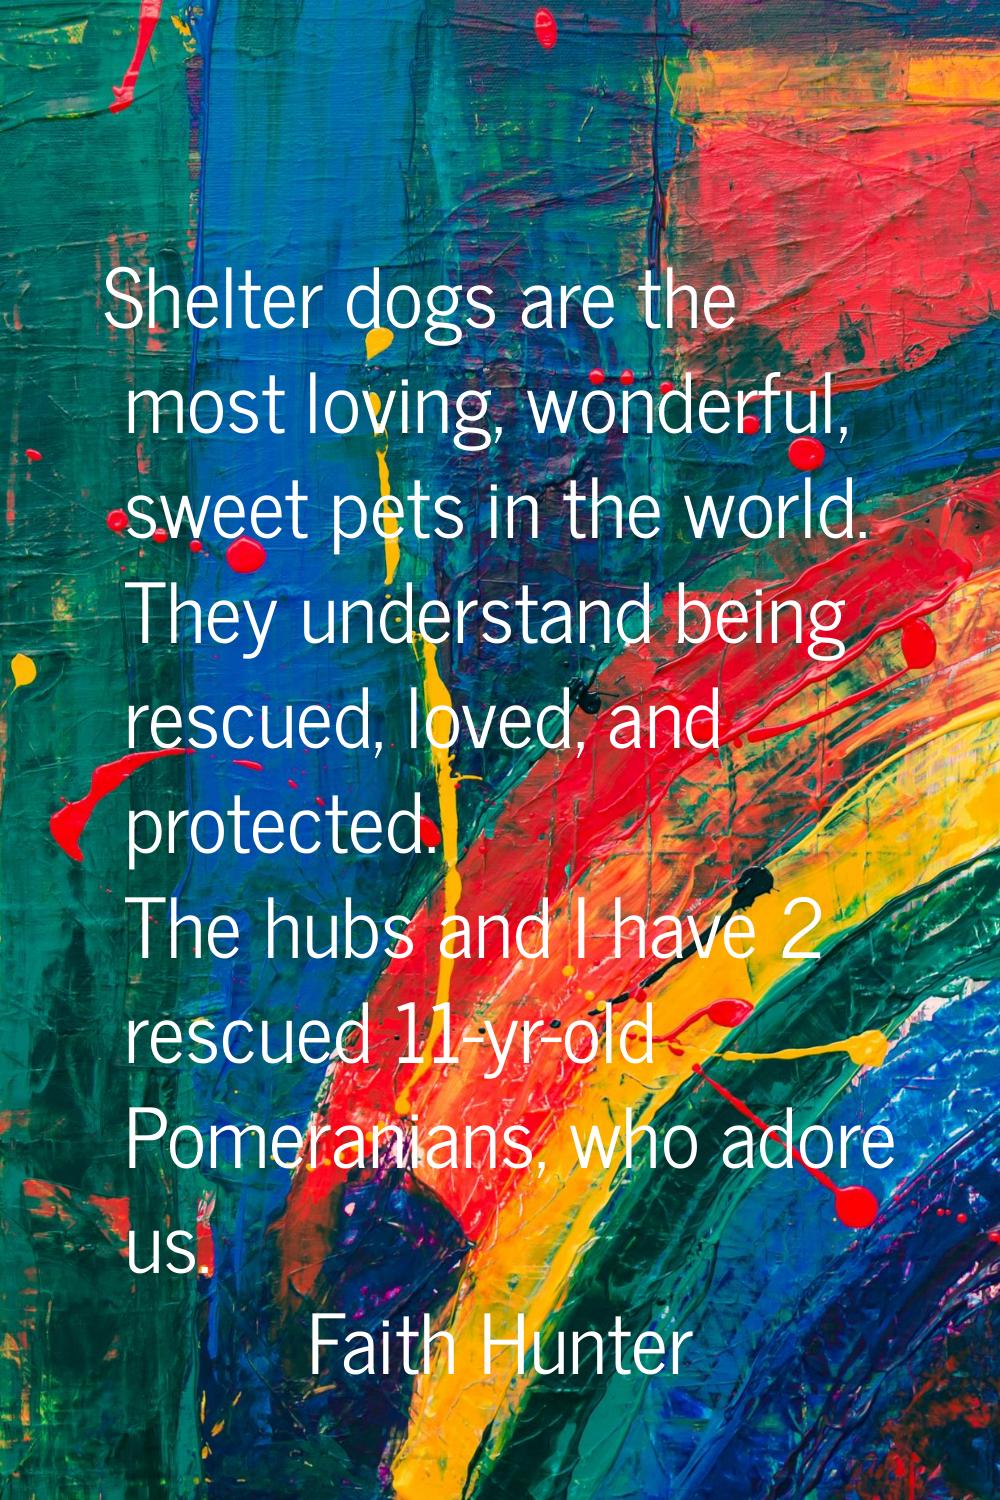 Shelter dogs are the most loving, wonderful, sweet pets in the world. They understand being rescued